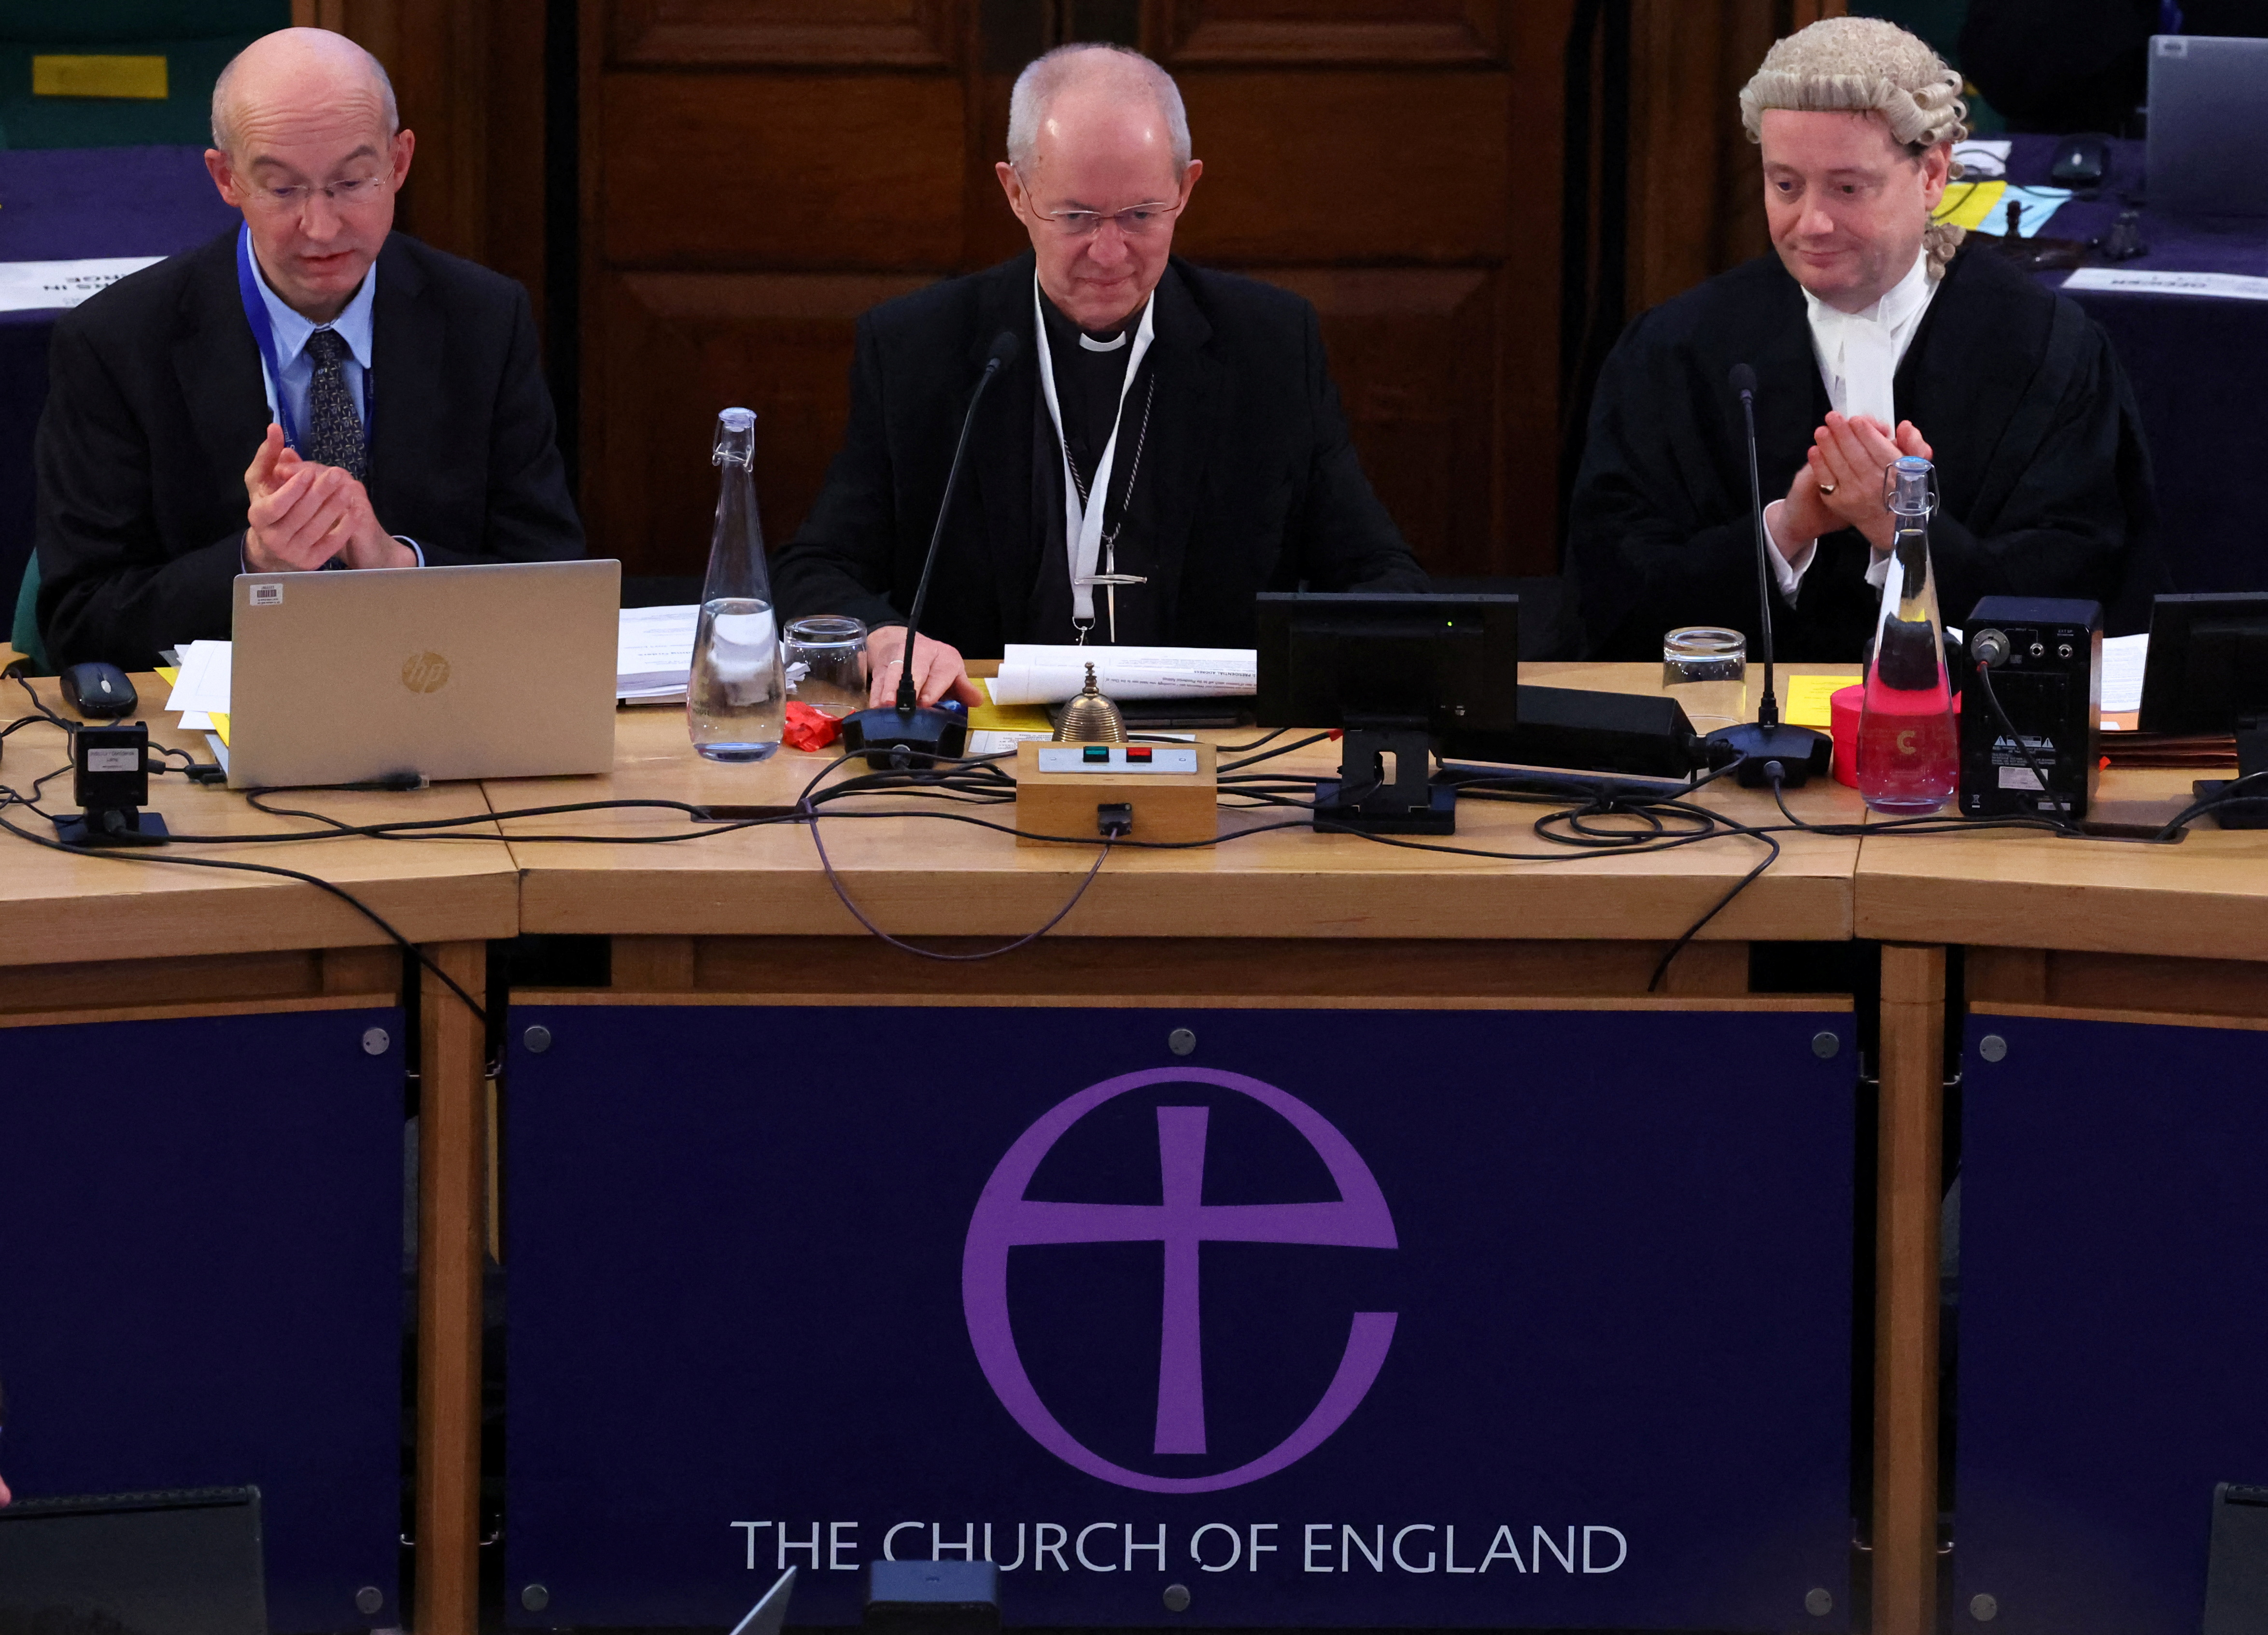 Archbishop of Canterbury, Welby attends Church of England General Synod meeting in London